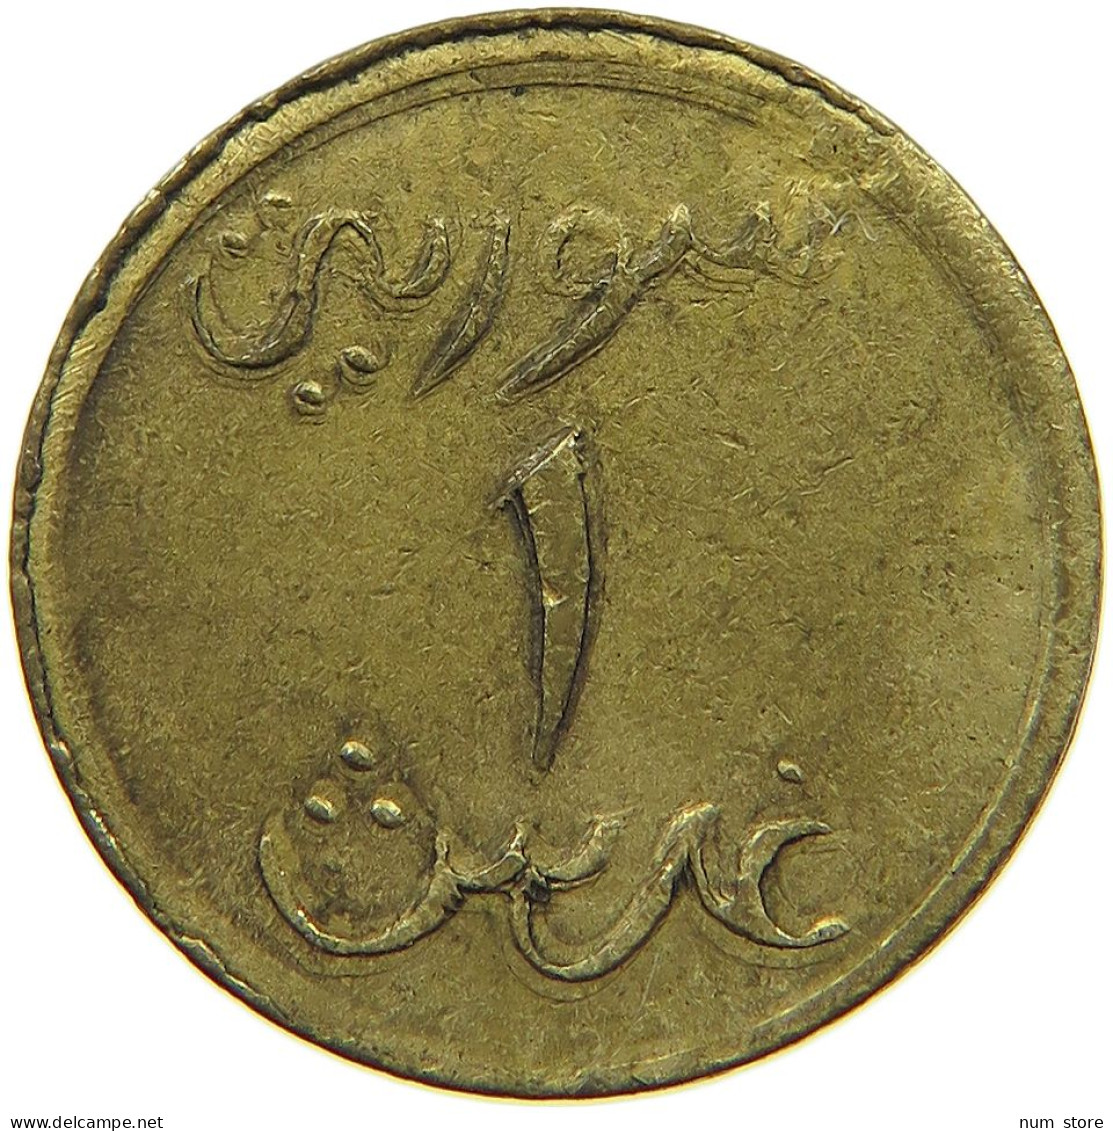 SYRIA PIASTRE  DOUBLE STRUCK REVERSE #MA 020803 - Syrie